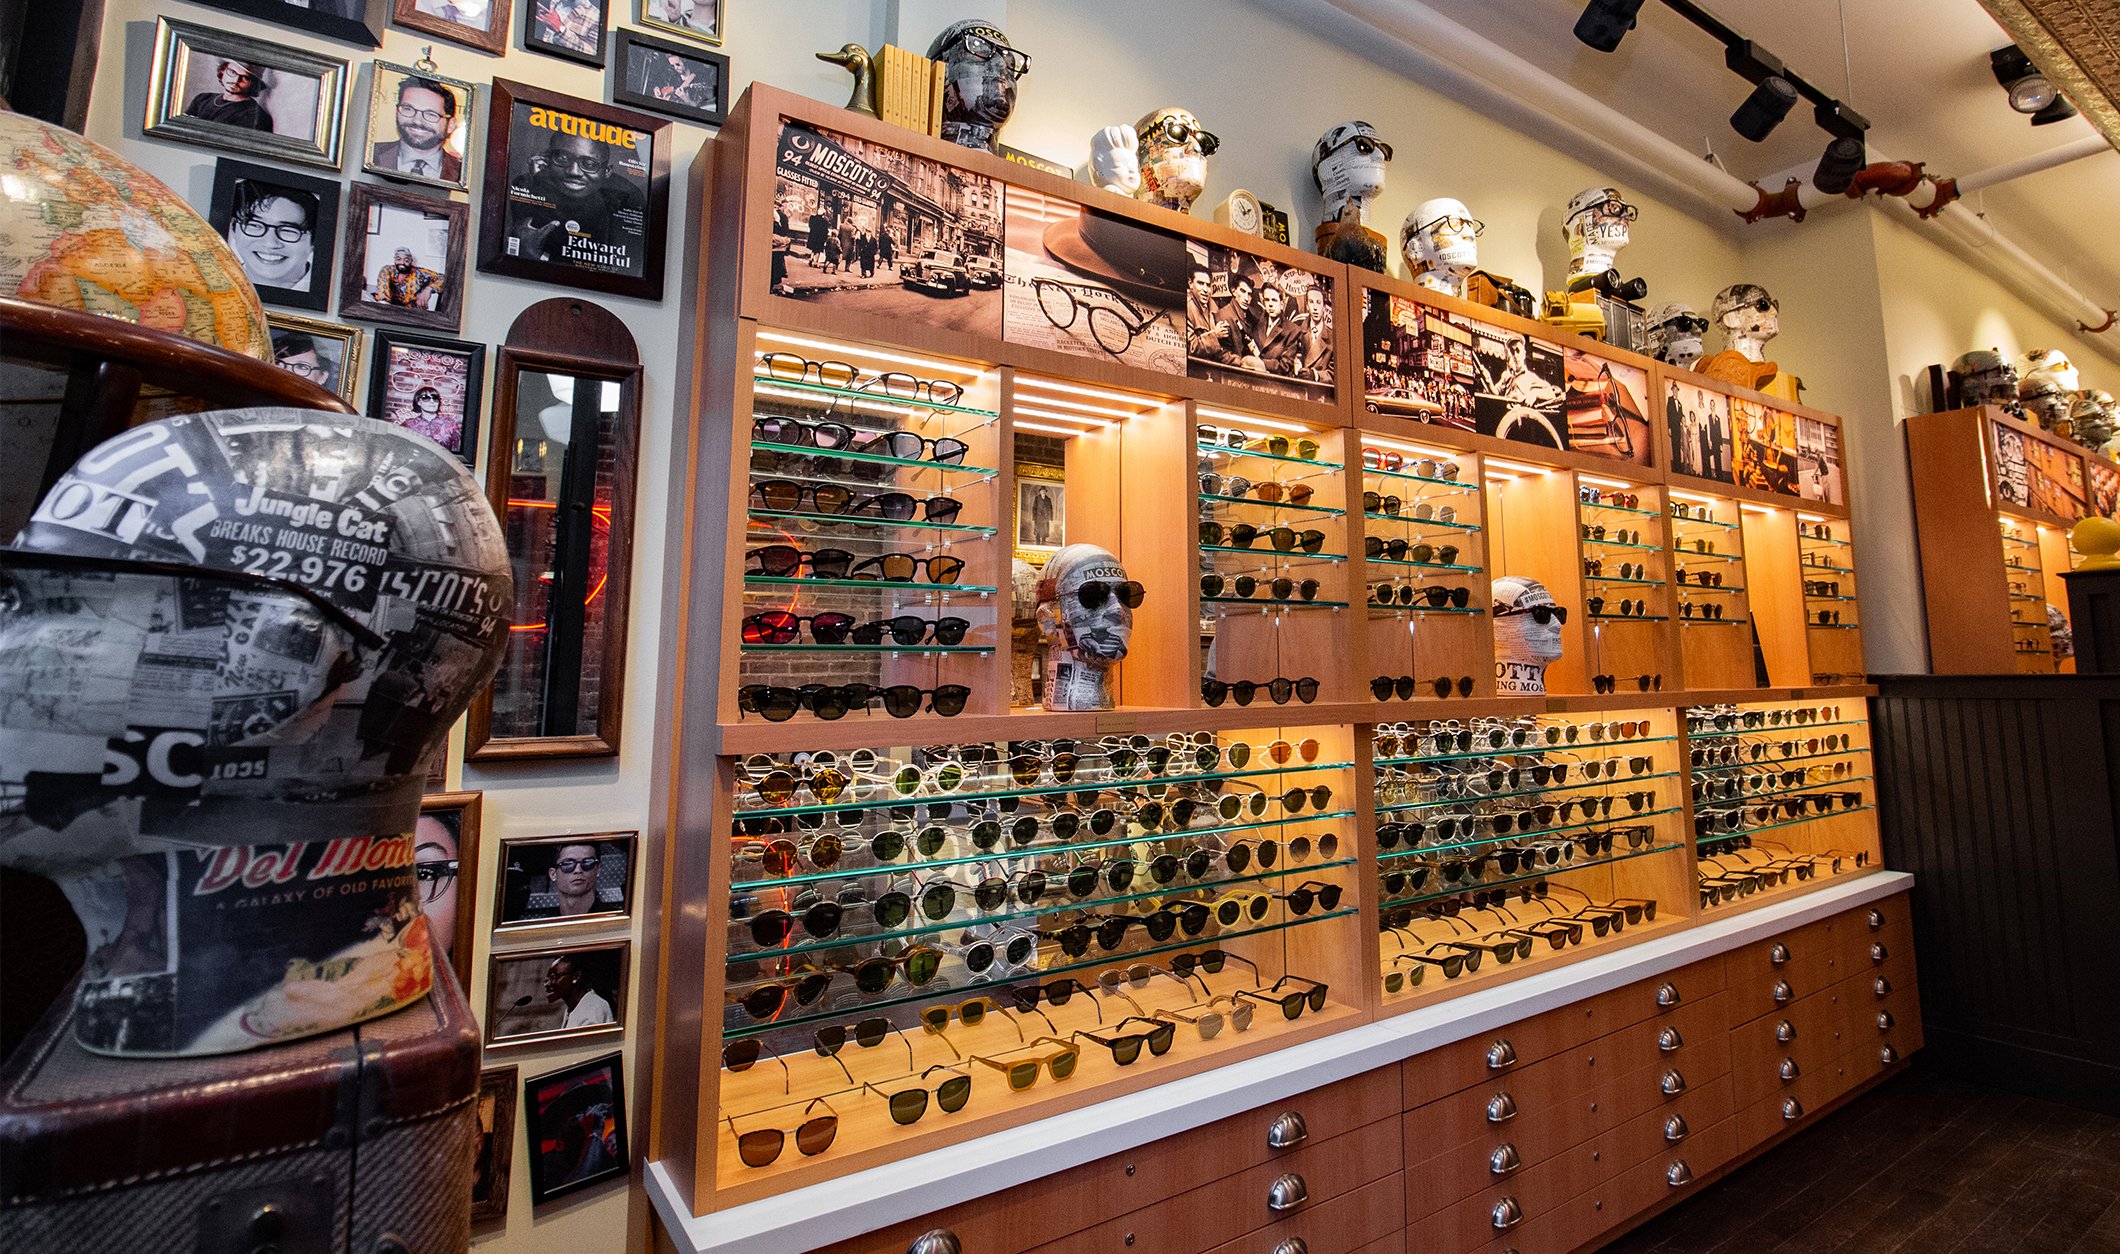 The MOSCOT Upper West Side Shop interior